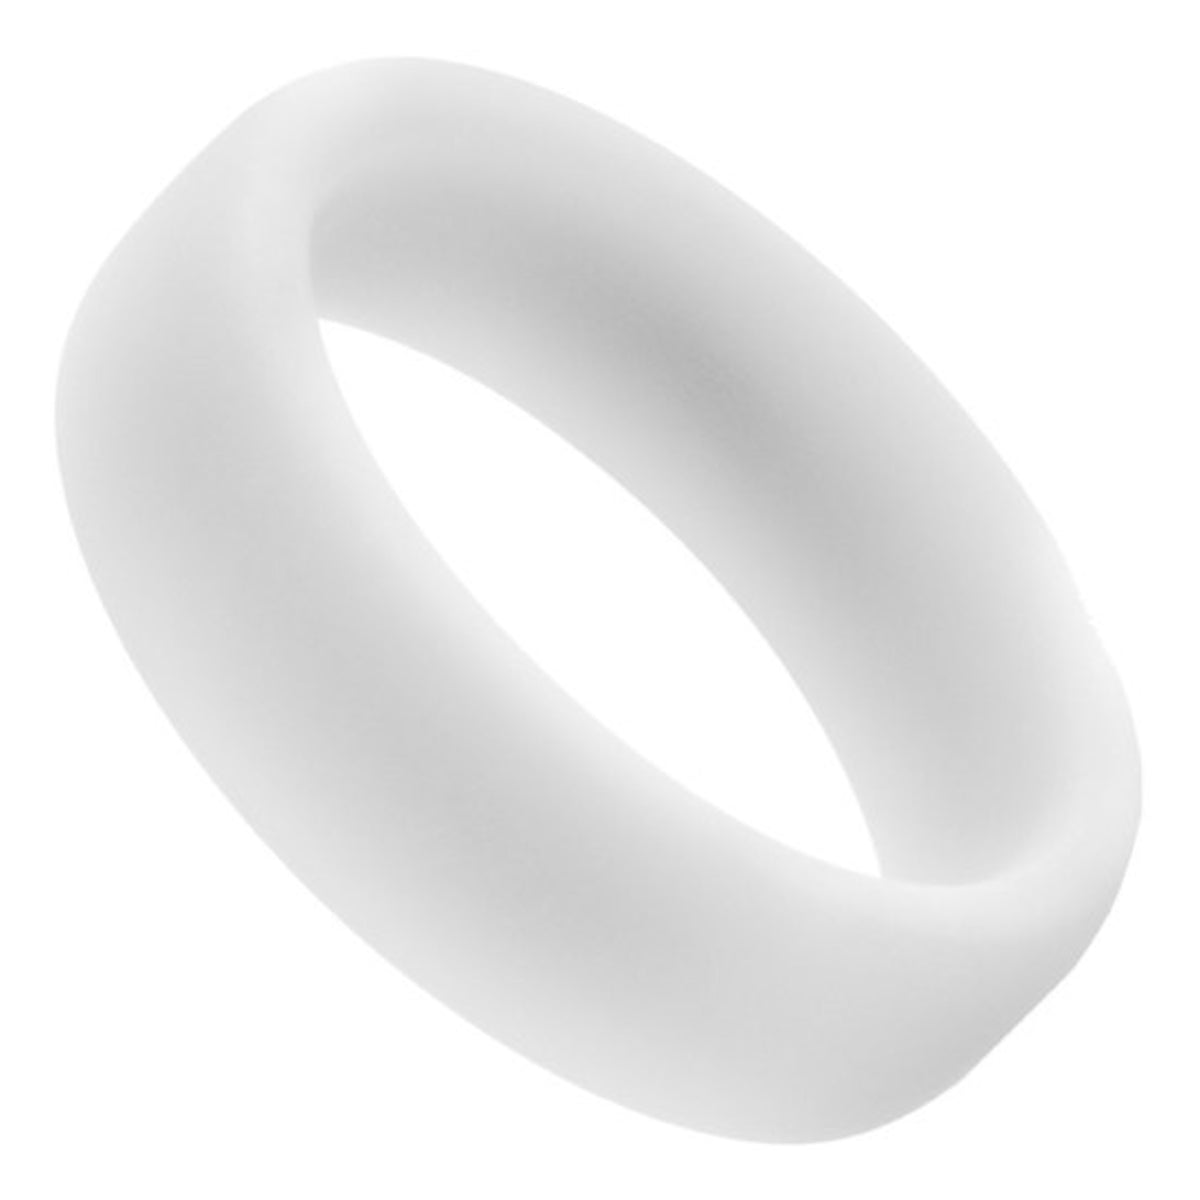 The Glo Cock Ring in &ldquo;White Glow&rdquo; is a soft, stretchy ring crafted for maximum comfort &amp; it glows in the dark!